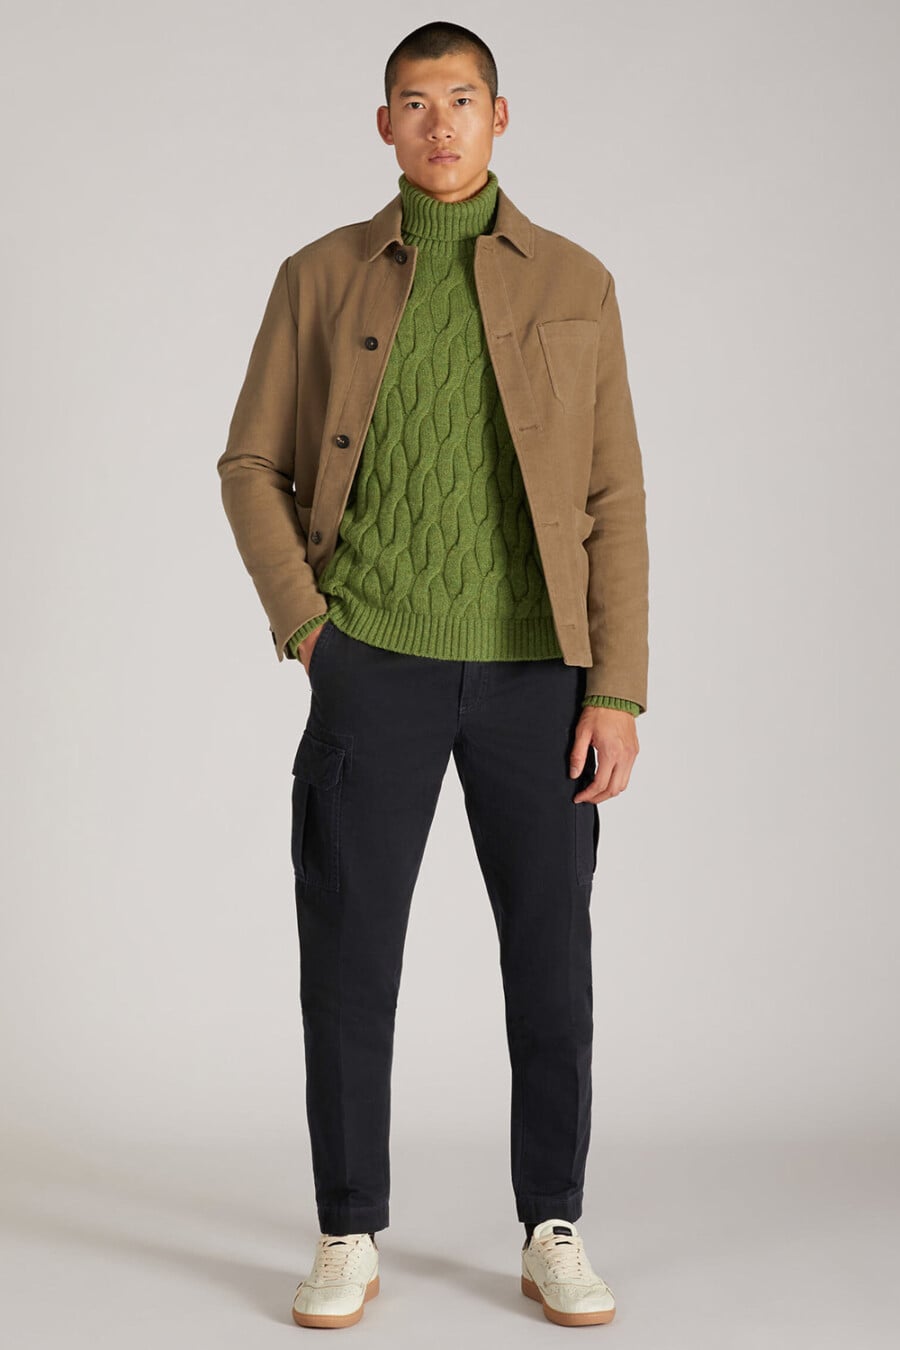 Men's navy cargo pants, green cable knit turtleneck sweater, khaki twill overshirt and off-white gum sole sneakers outfit